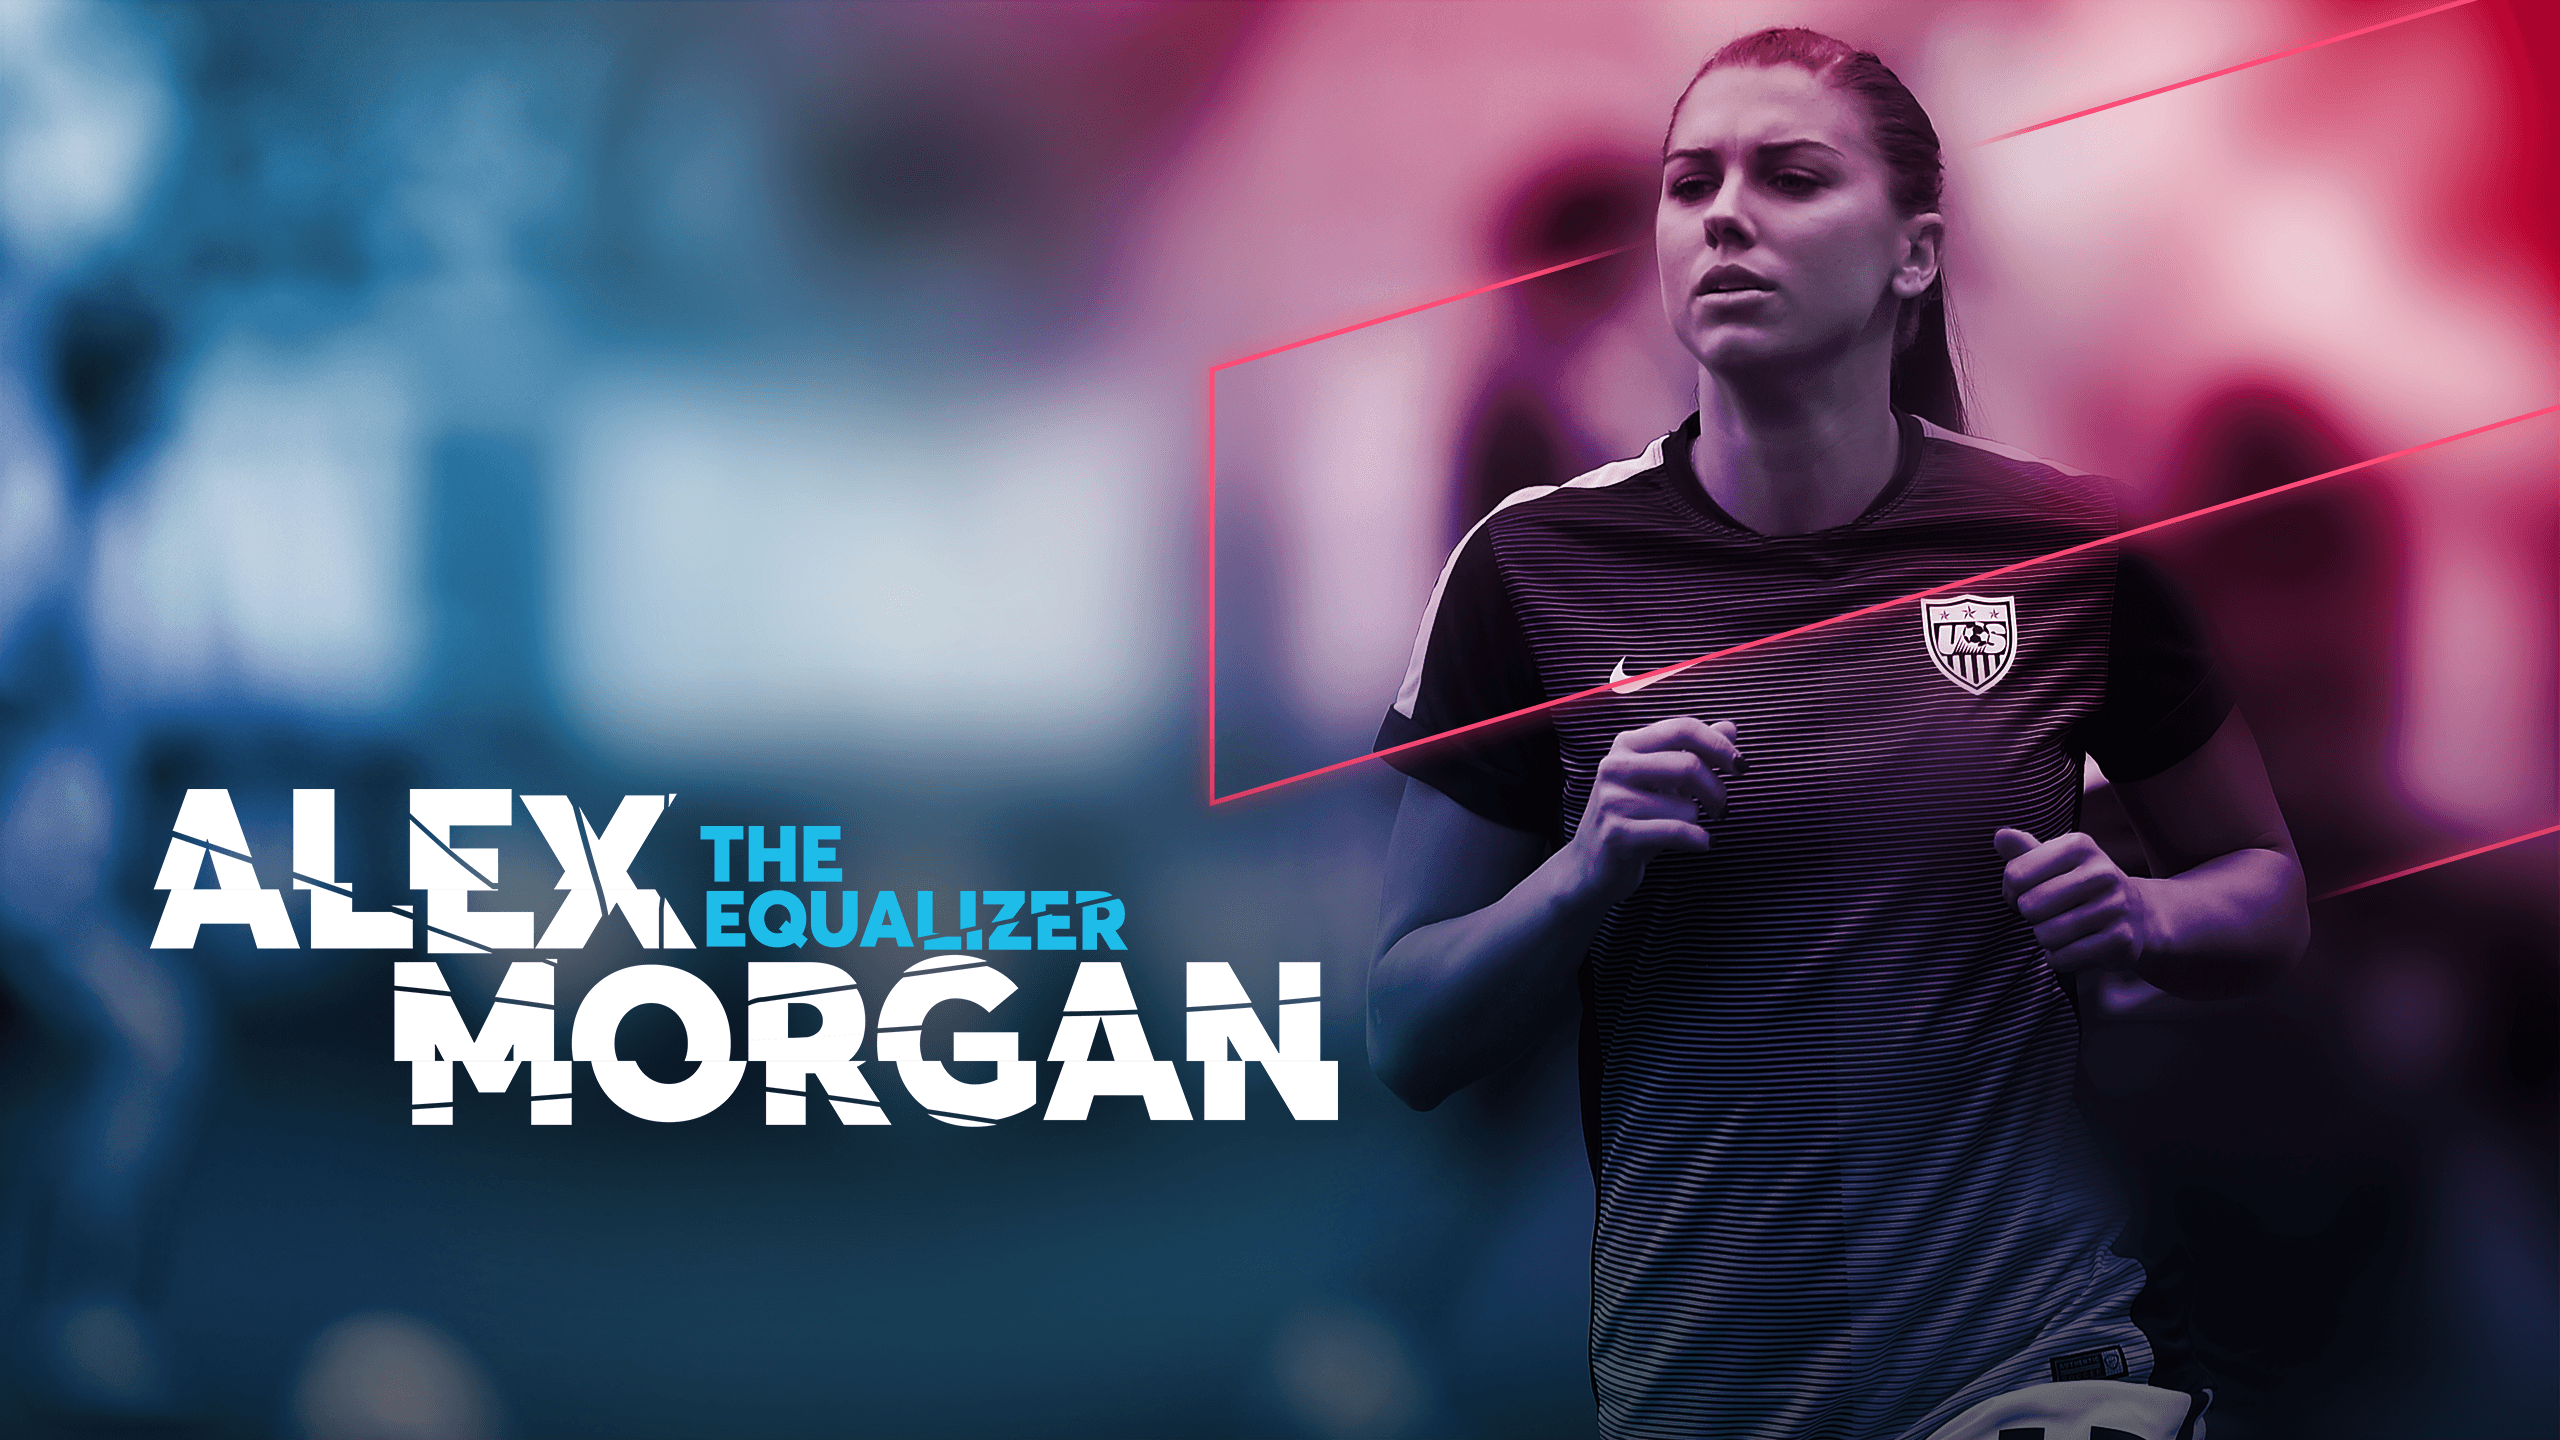 New on ESPN+: The Equalizer Featuring Alex Morgan